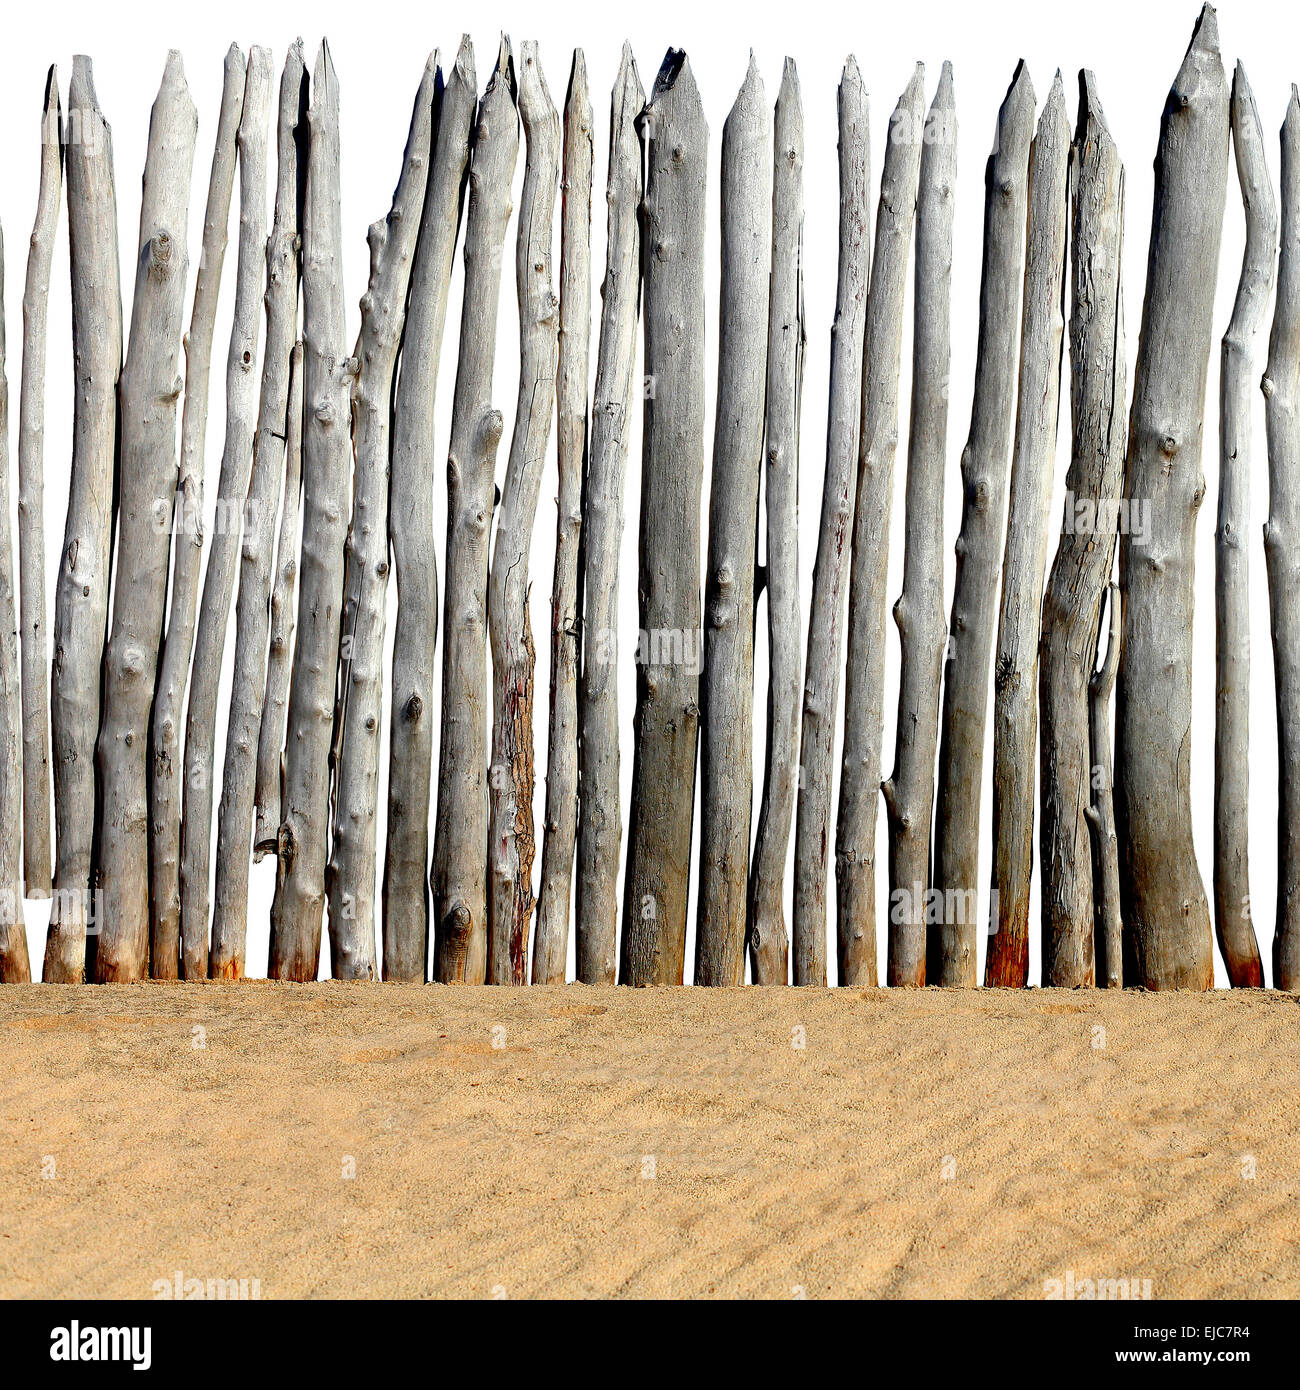 Wooden Fence on the Sand Stock Photo